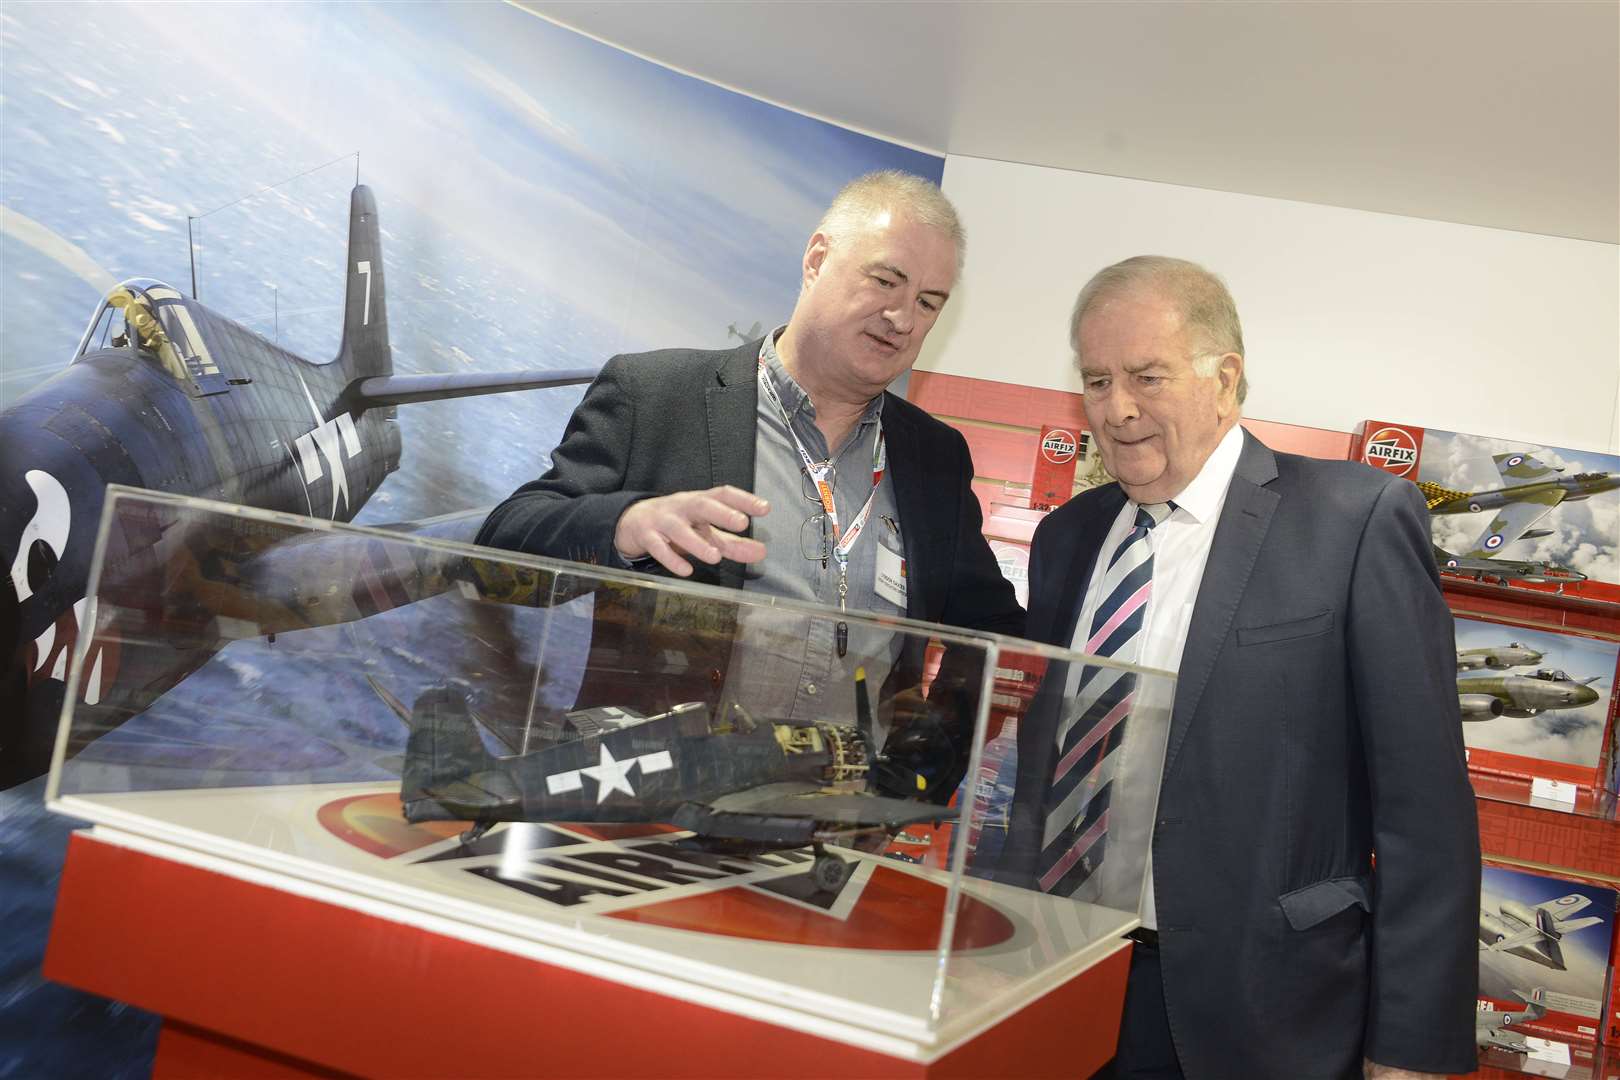 Hornby chief executive Lyndon Davies, left, says the company has a bright future after slashing its losses. Thanet North MP Sir Roger Gale views the Hellcat model at the reopening of Hornby's offices in Margate earlier this year. Picture: Paul Amos. (7279902)